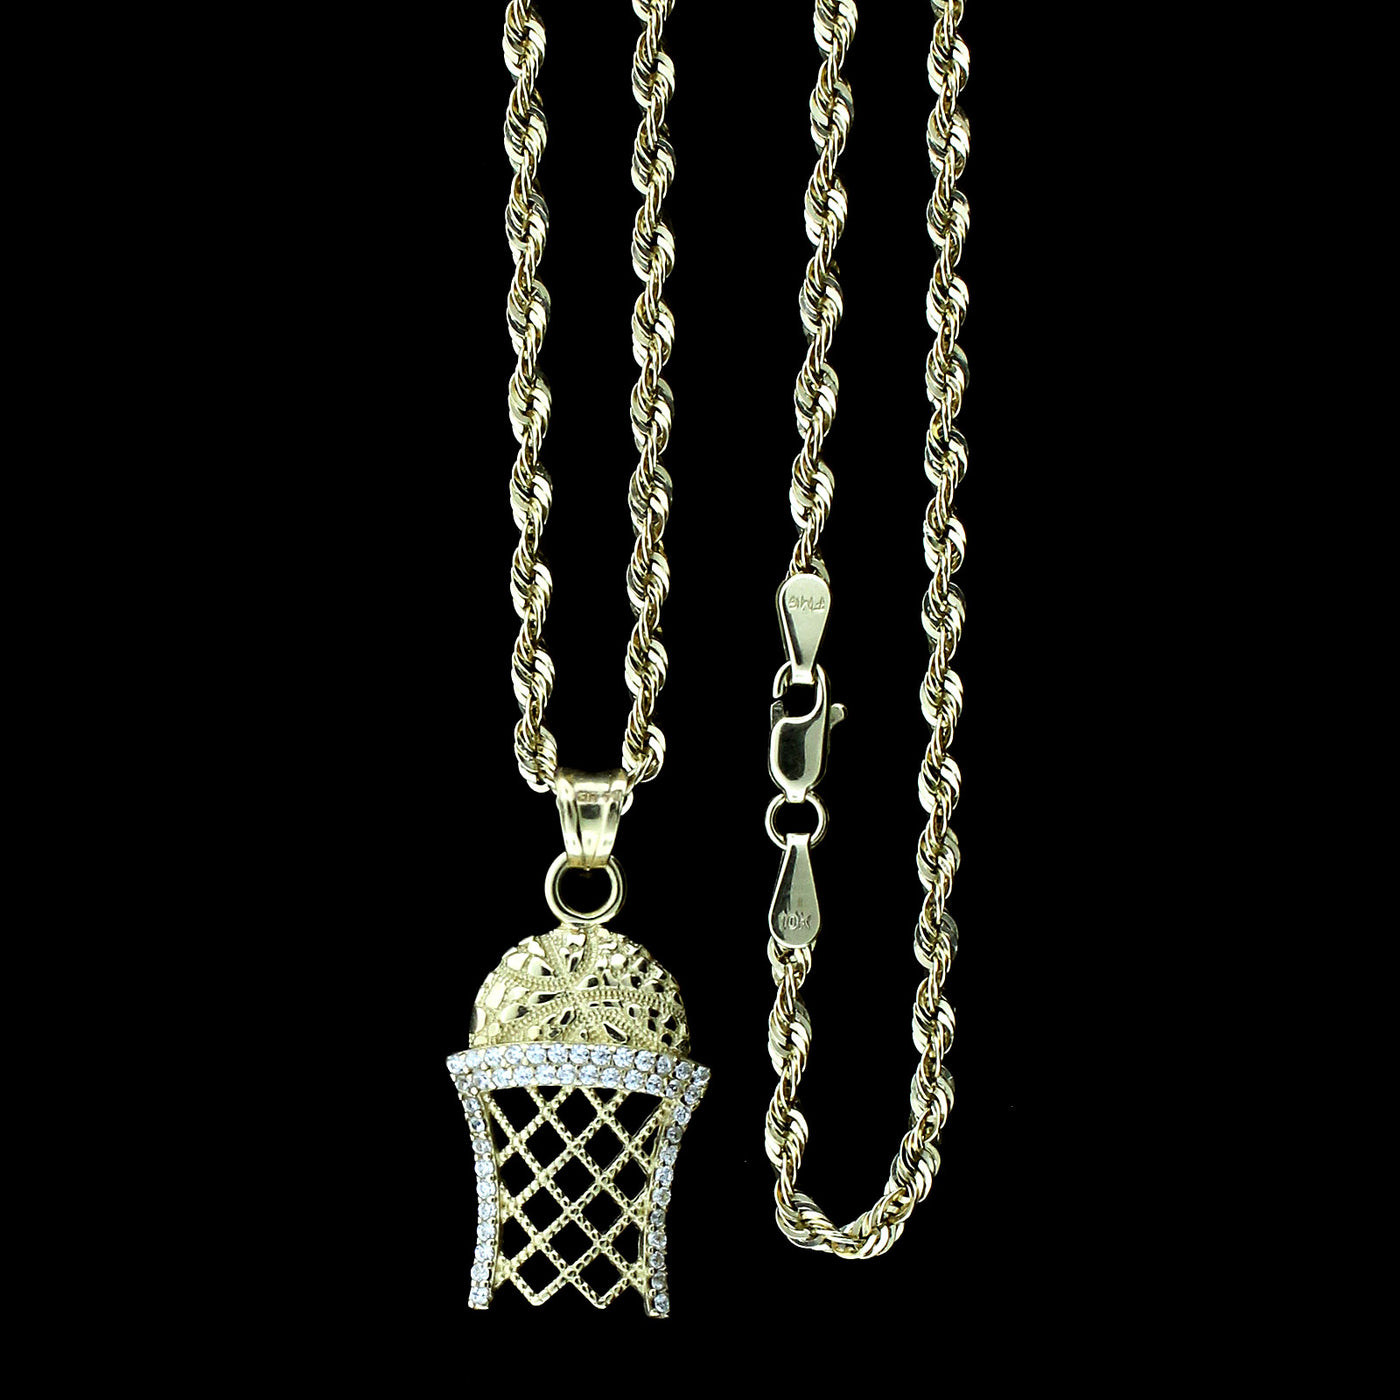 Real 10K Yellow Gold Diamond Cut Basketball CZ Pendant & 2.5mm Rope Chain Necklace Set